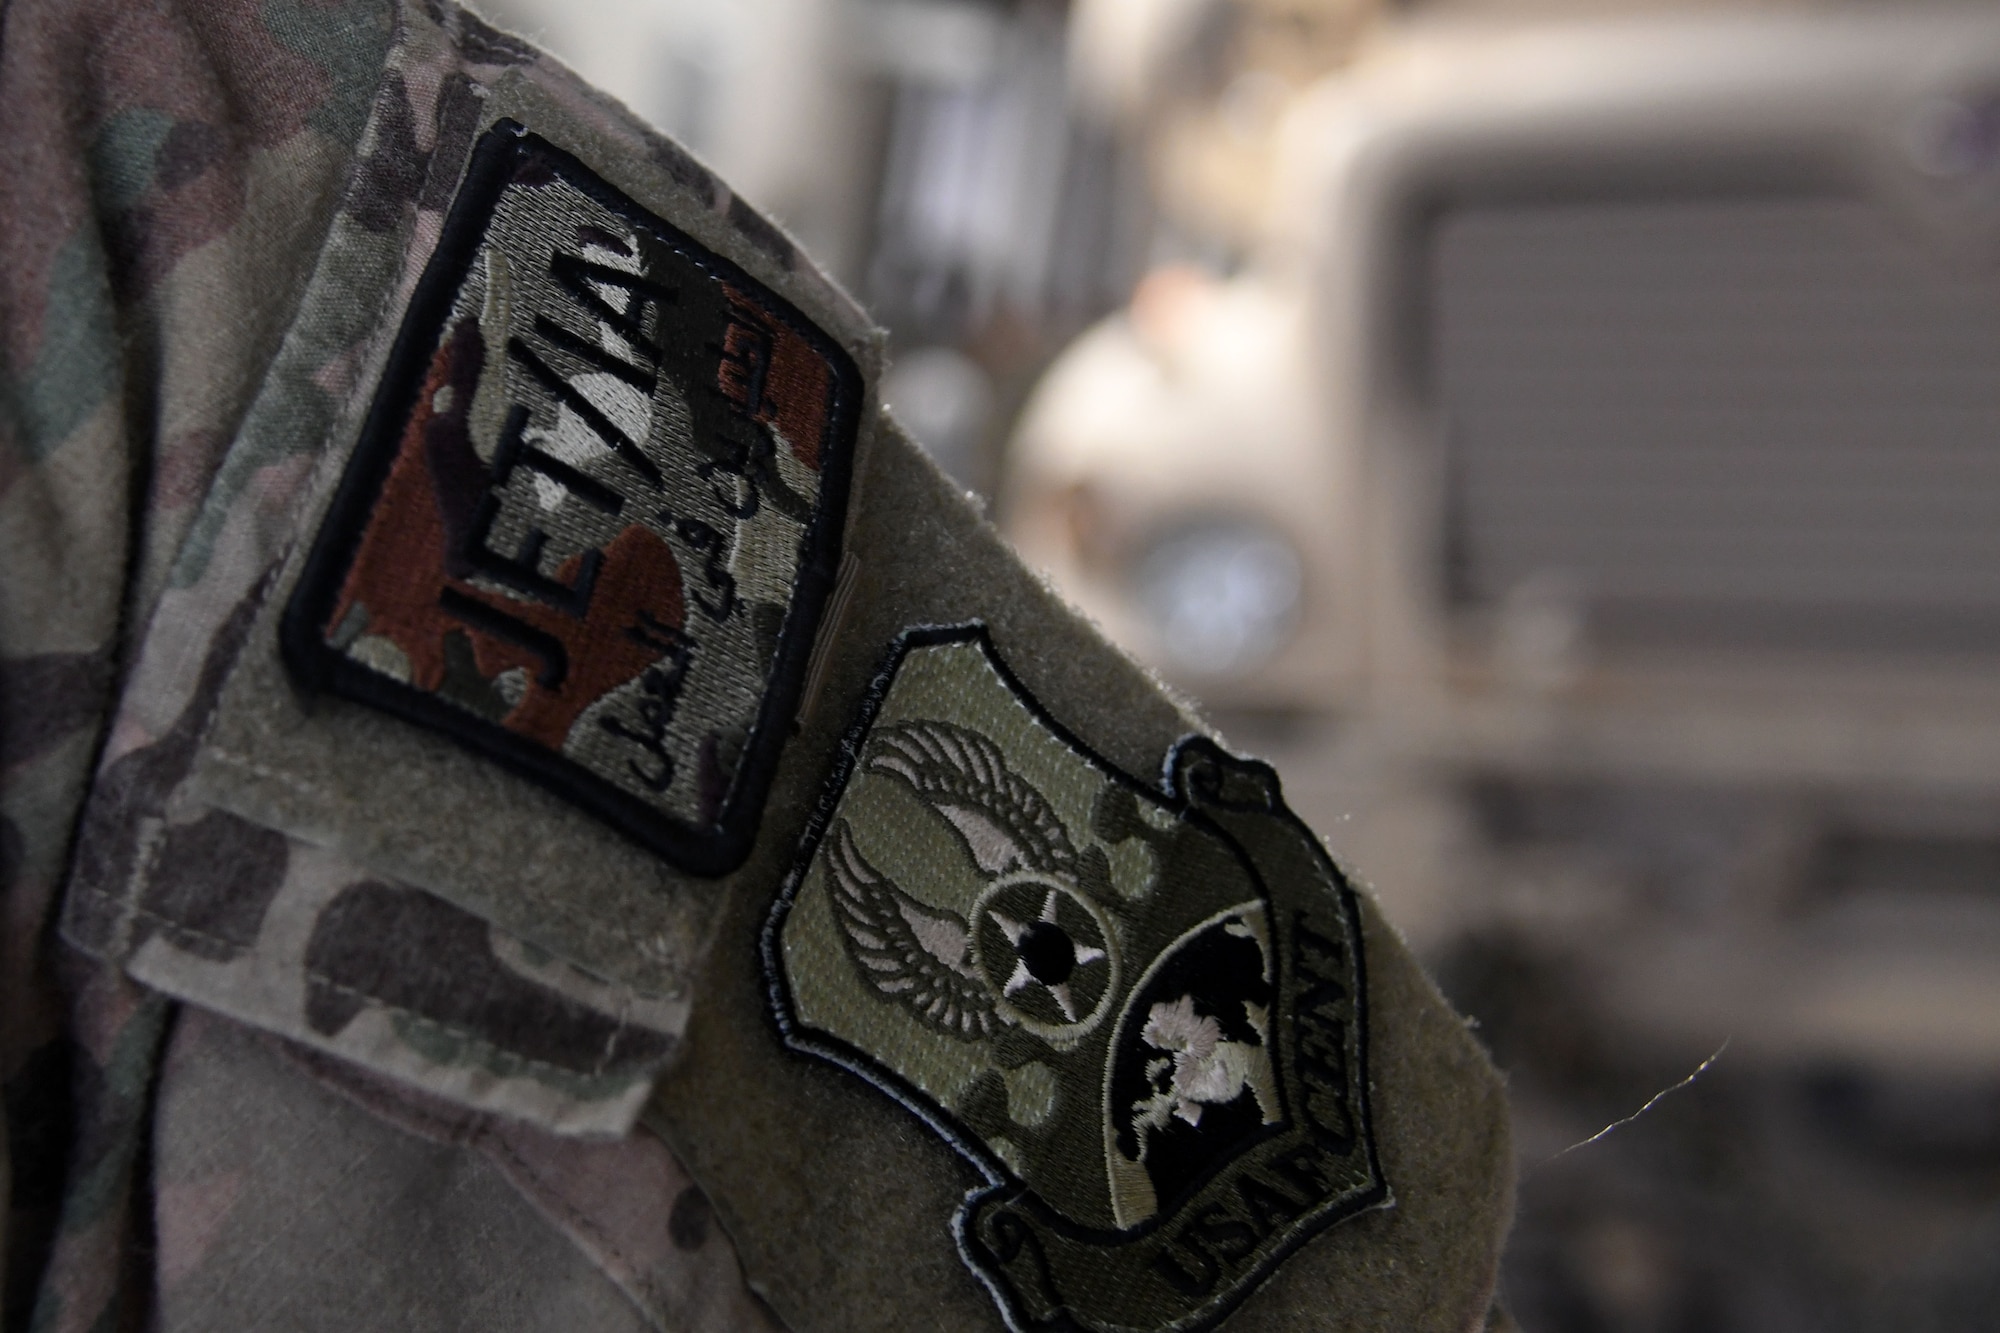 A JET/IA patch is affixed to the uniform of Tech Sgt. Ronald Gowen, a logistician assigned to the 387th Air Expeditionary Squadron.  The 387th Air Expeditionary Squadron is responsible for more than 300 of these Joint Expeditionary Tasking and Individual Augmentee Airmen, who are currently deployed in 10 to 12 different countries. (U.S. Air Force photo/Senior Airman Andrew Park)

